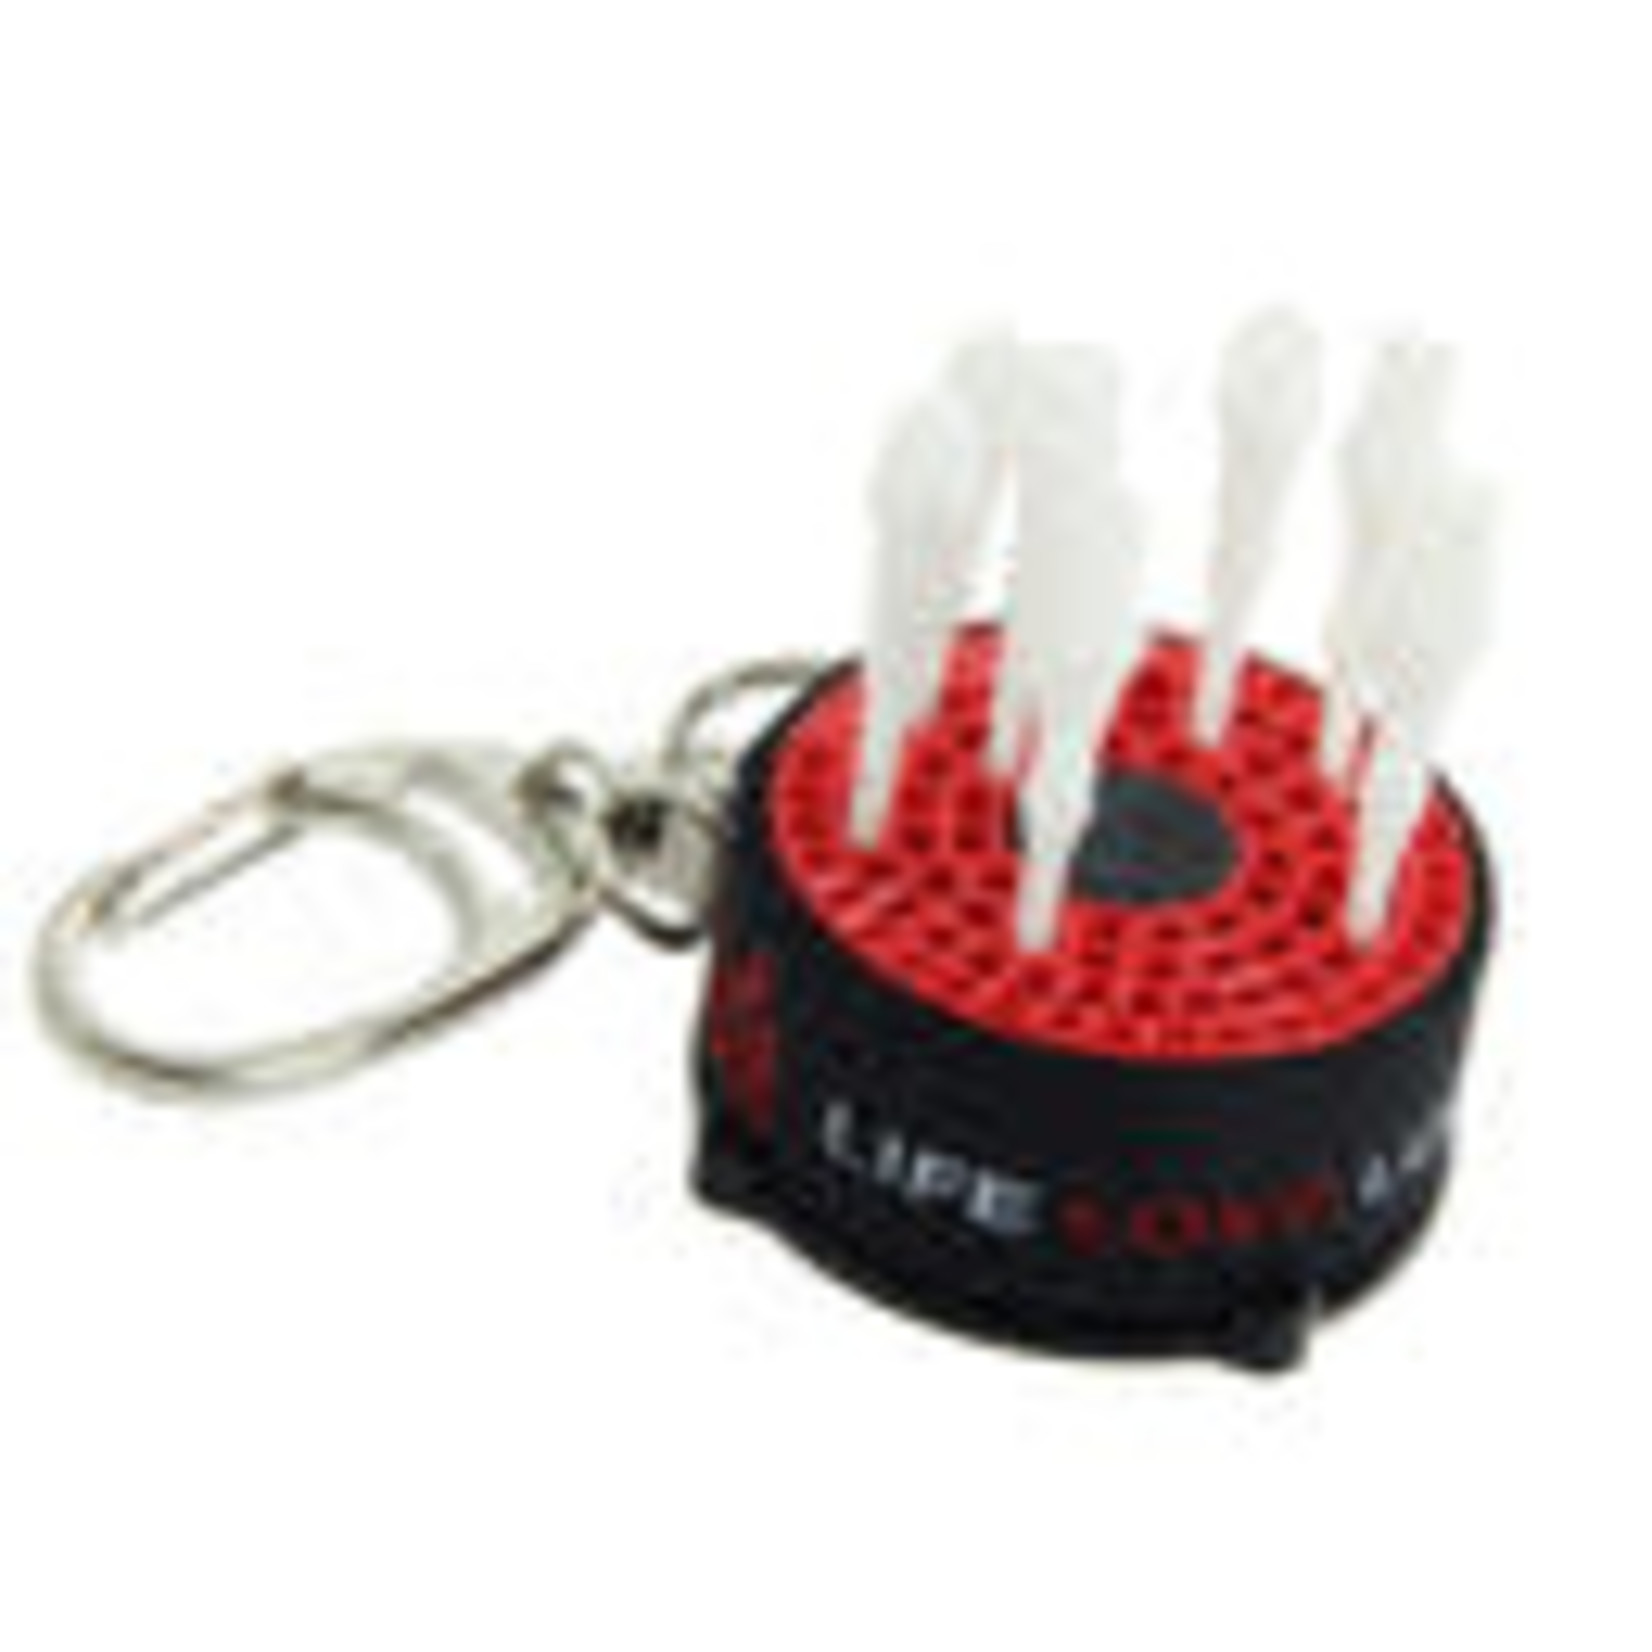 L-STYLE L-Style BULL Shaft and Tip Extractor - Red